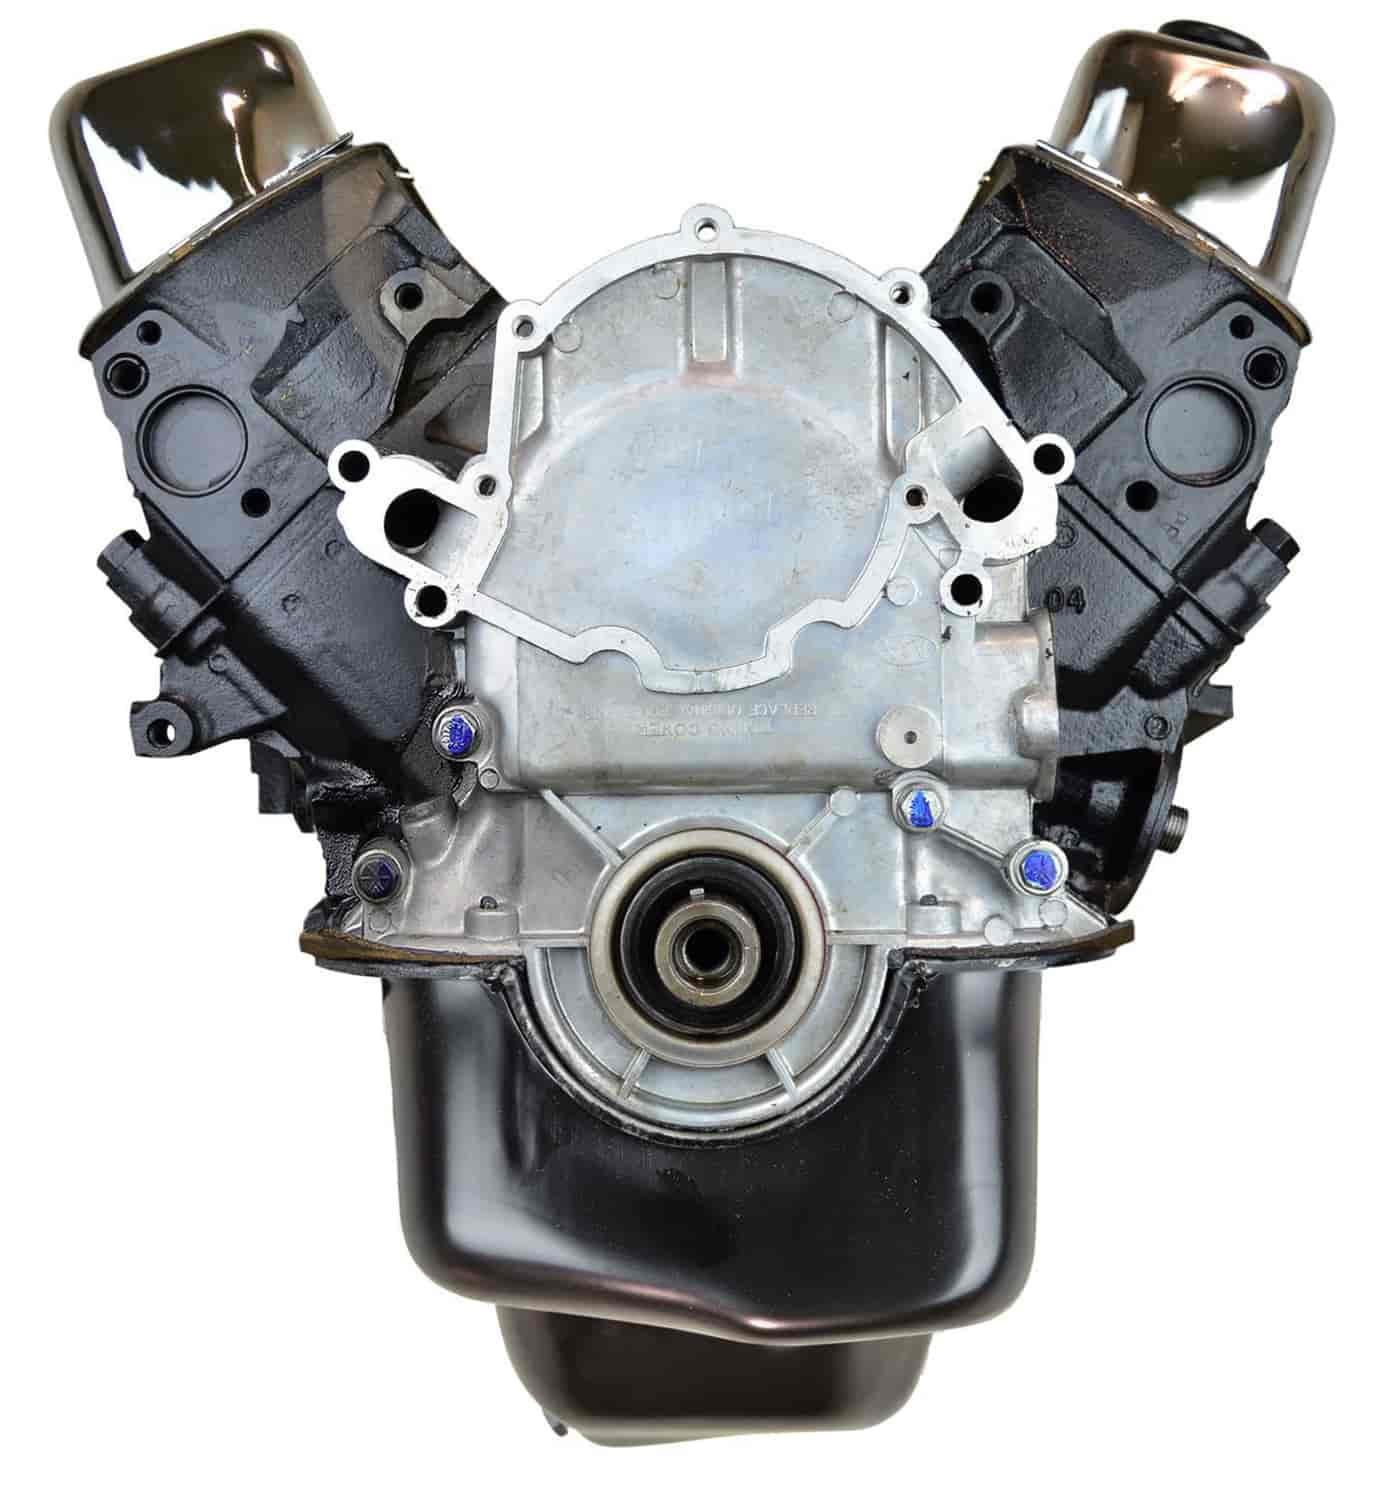 Remanufactured Crate Engine for 1980-1986 Ford F-Series Truck & E-Series Van with 302ci/5.0L V8